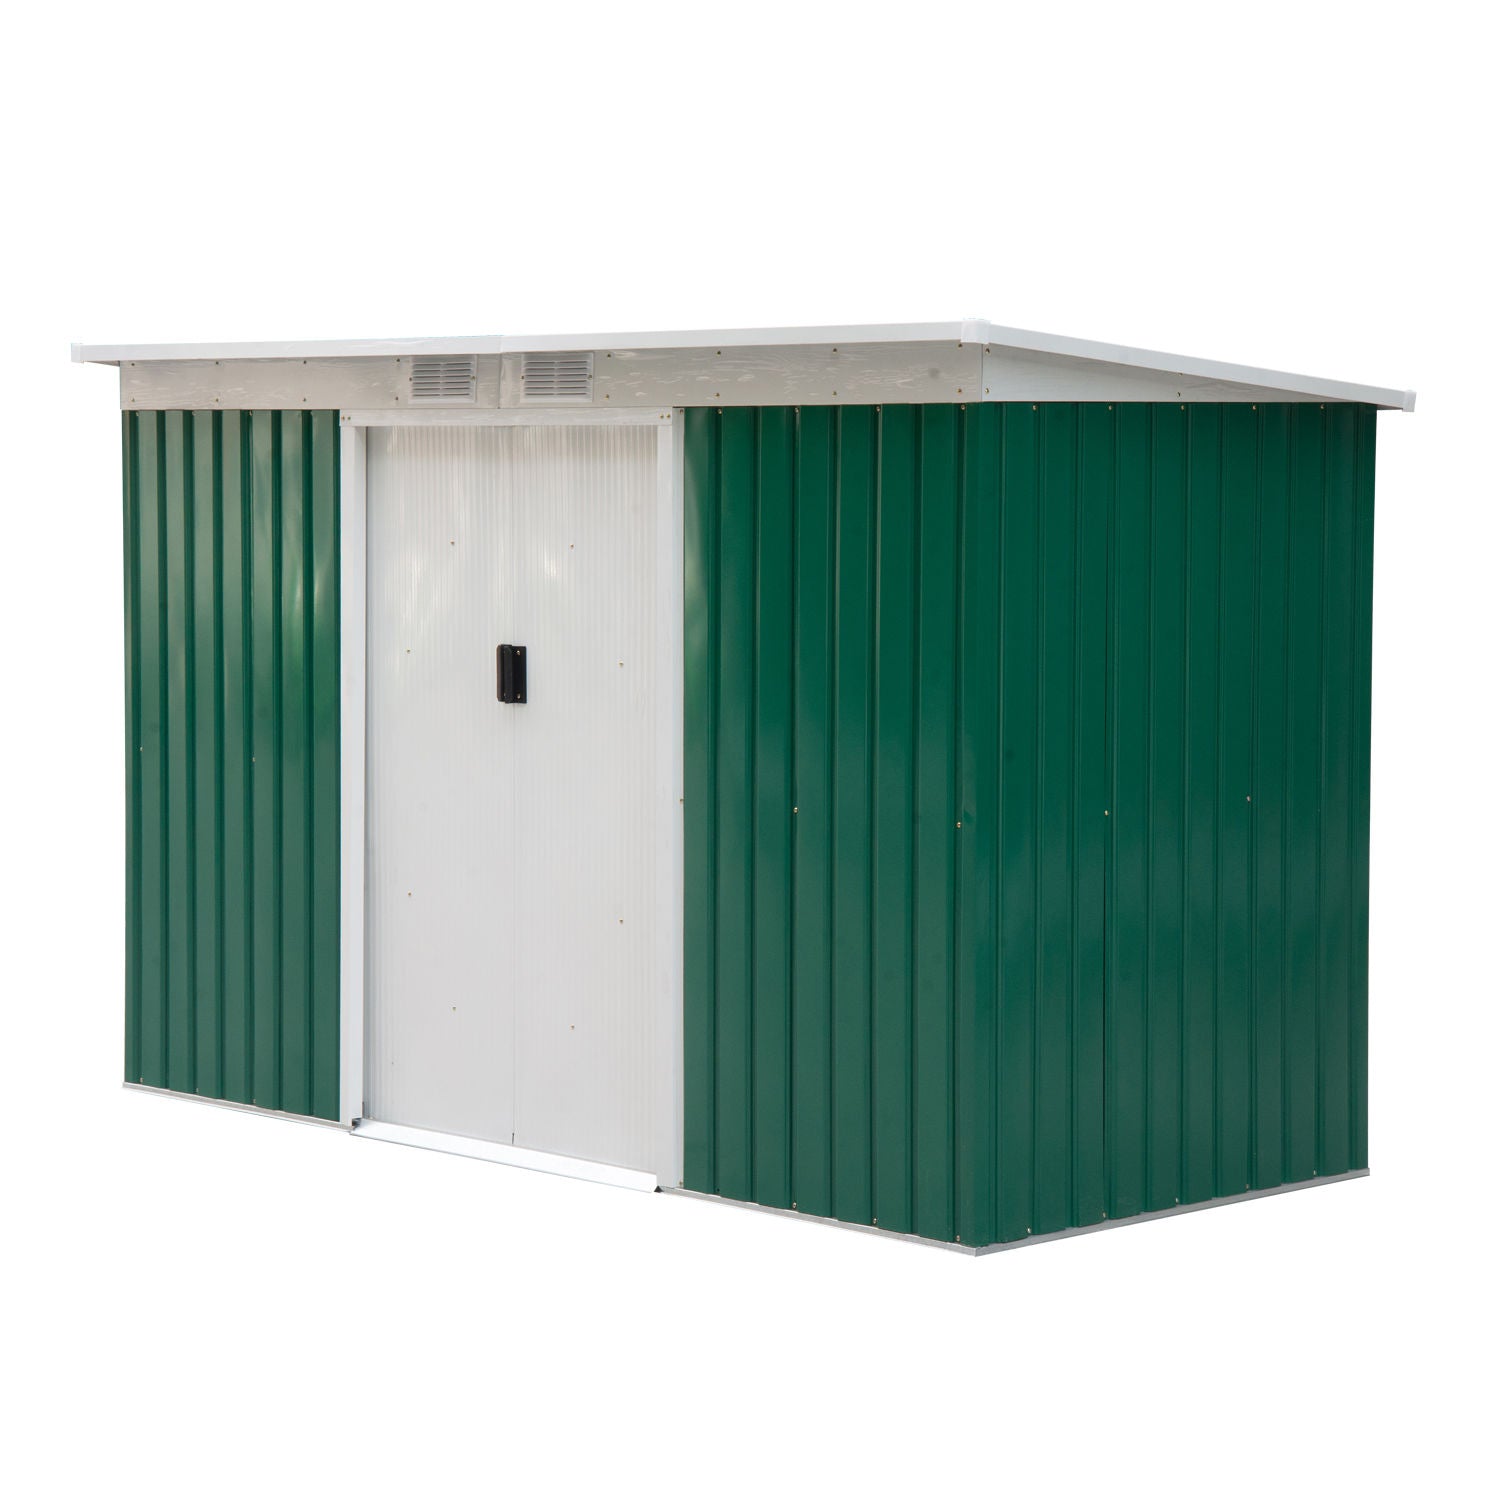 Nancy's Ansonia Tool shed with sliding door - Storage shed - Garden shed - Green - 280 x 130 cm